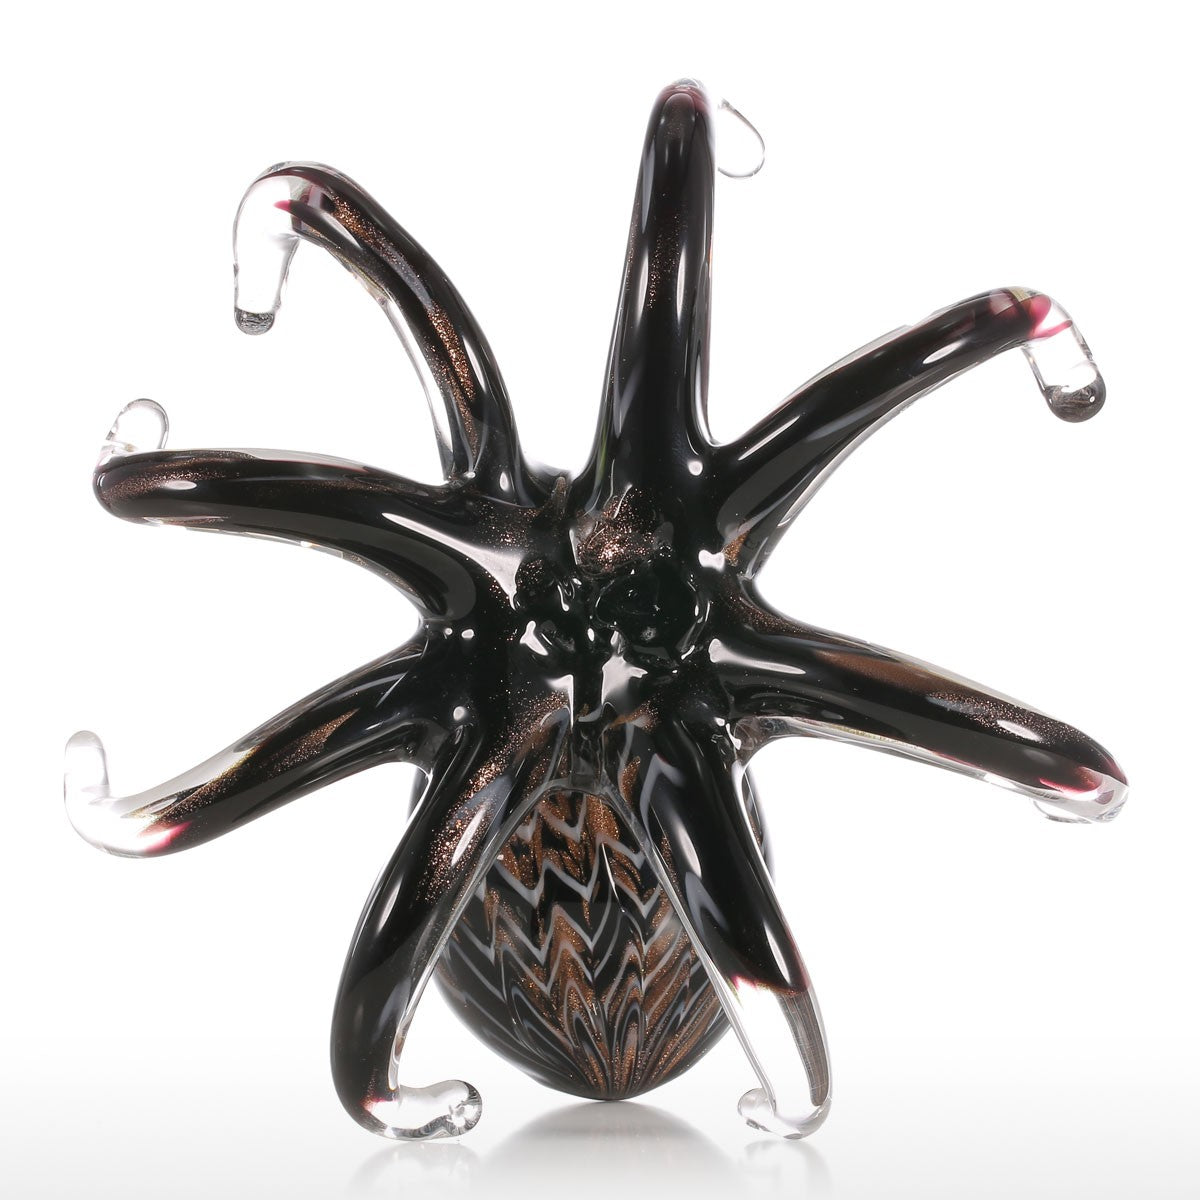 Black Octopus and Octopus Home Decor with Glass Octopus for Christmas Gifts and Christmas Ornaments